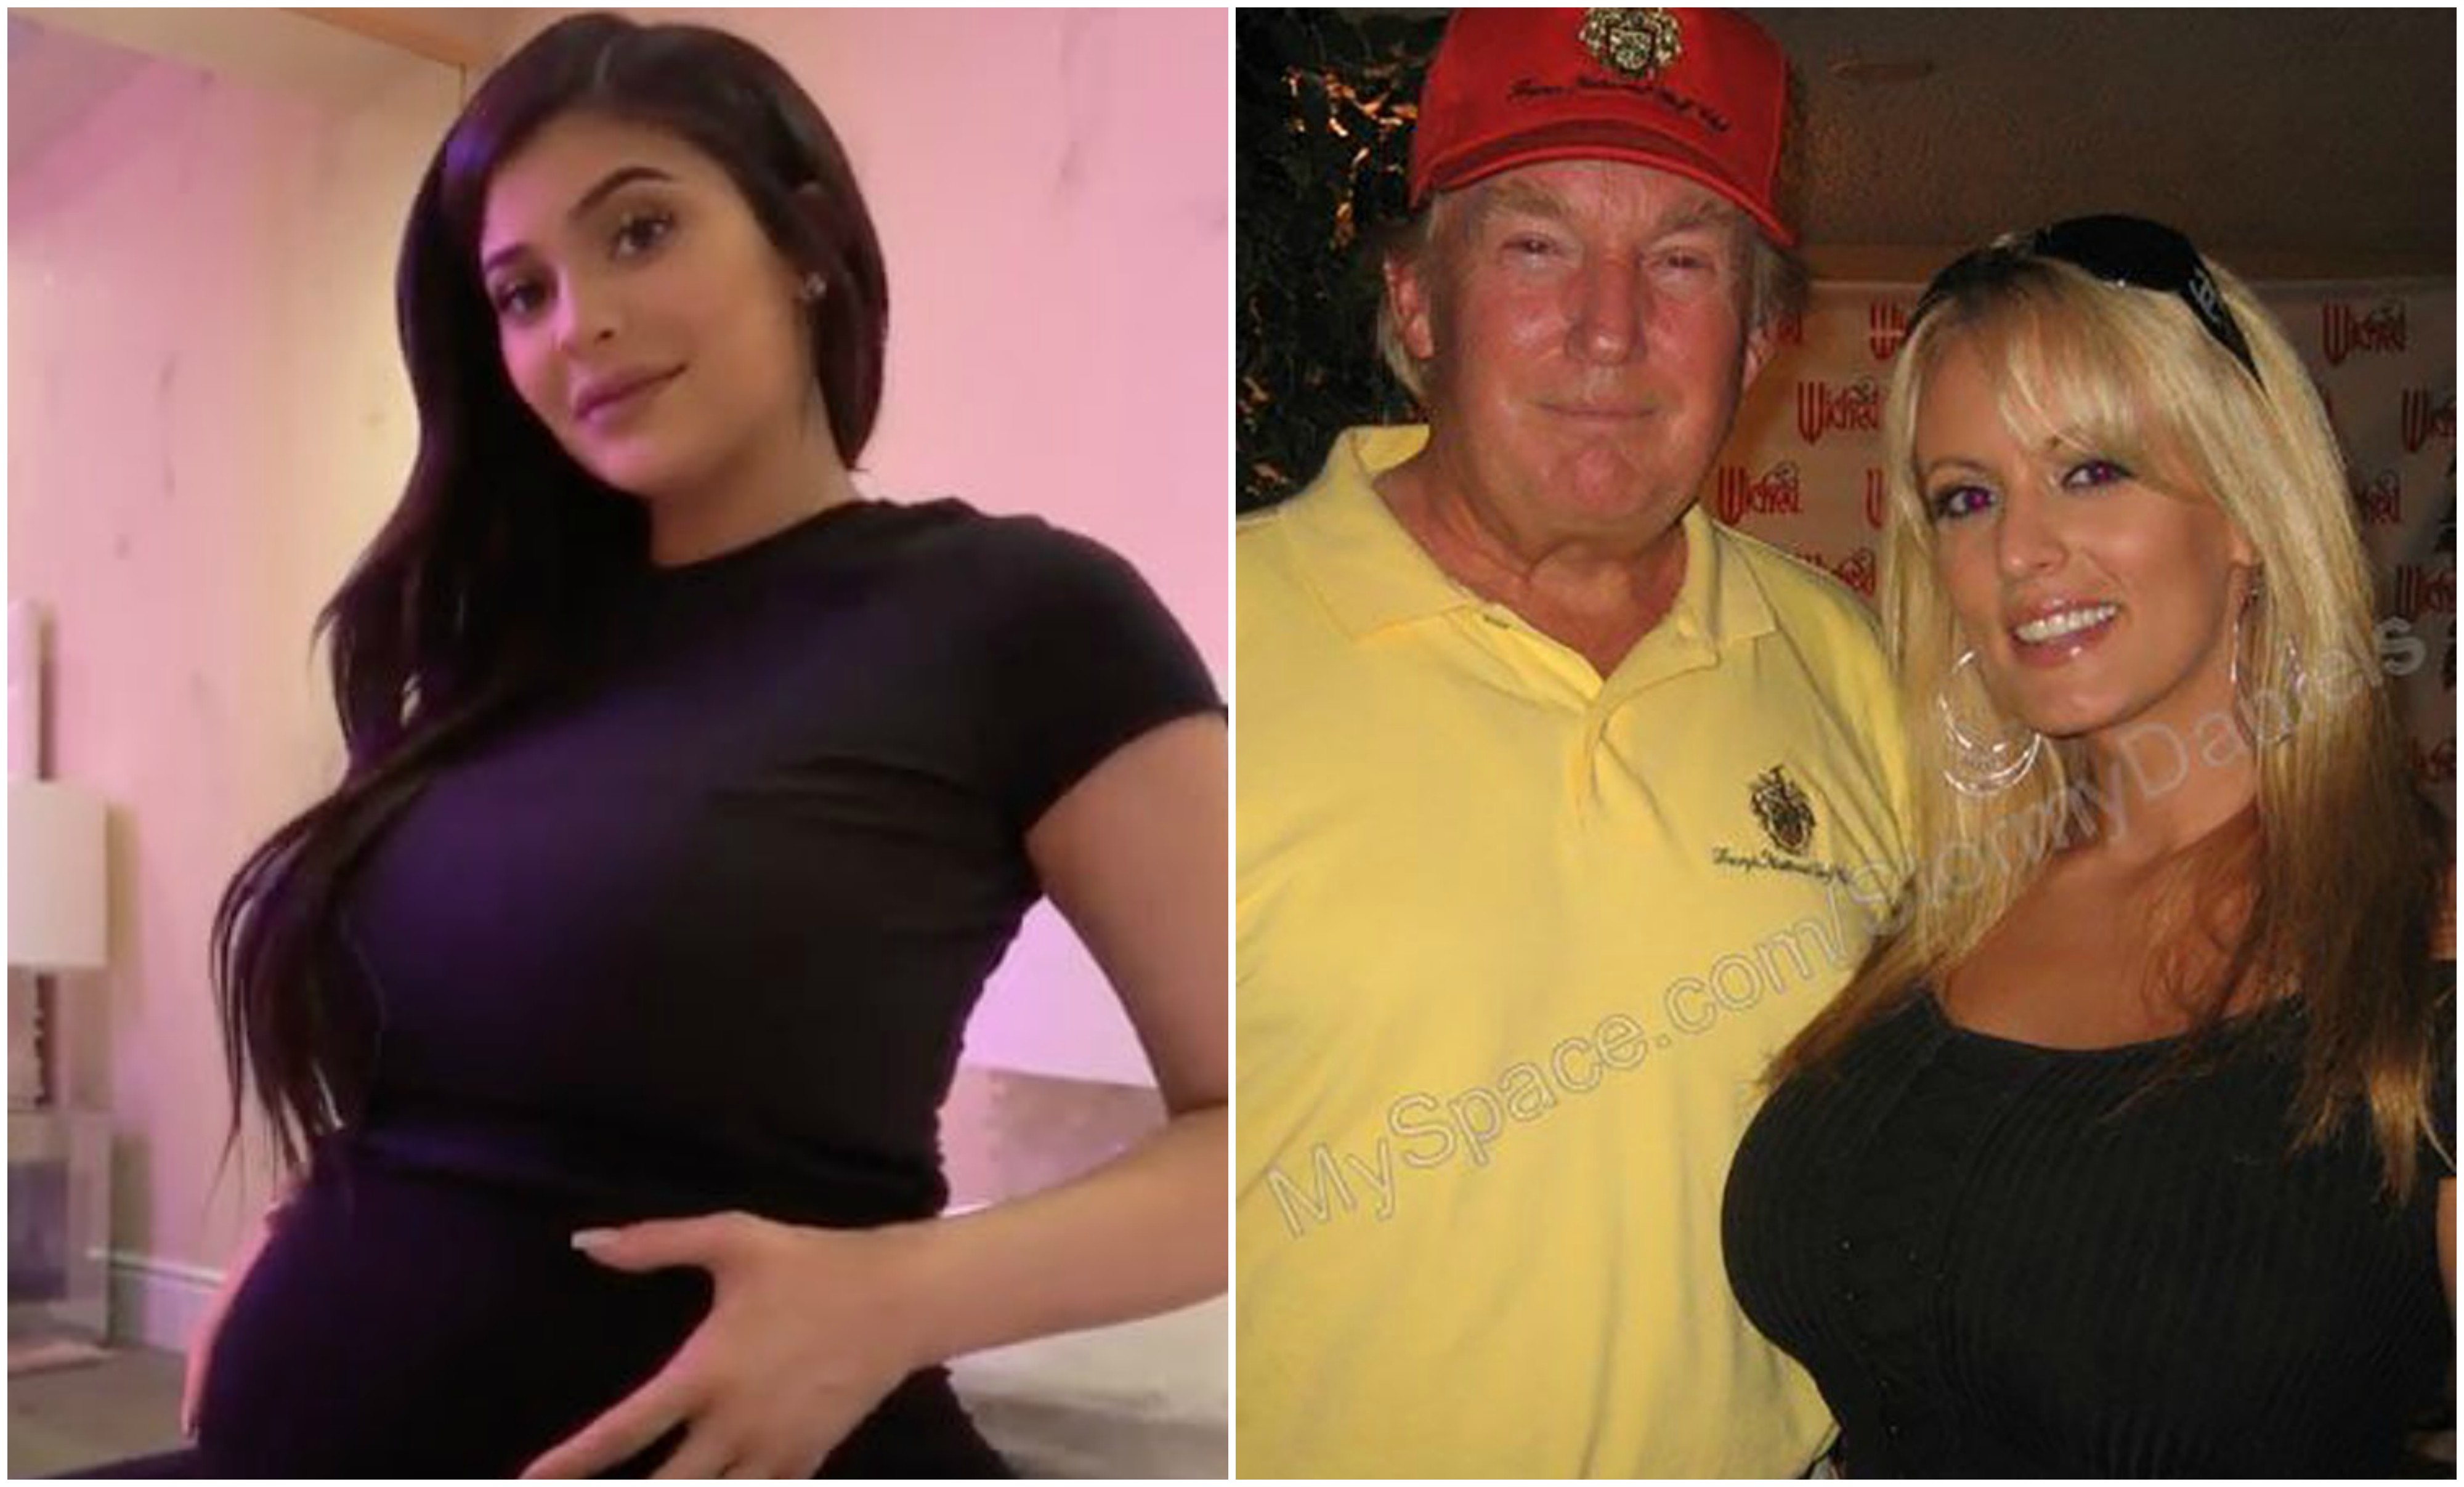 The Internet Thinks Kylie Jenner Named Stormi After Stormy Daniels